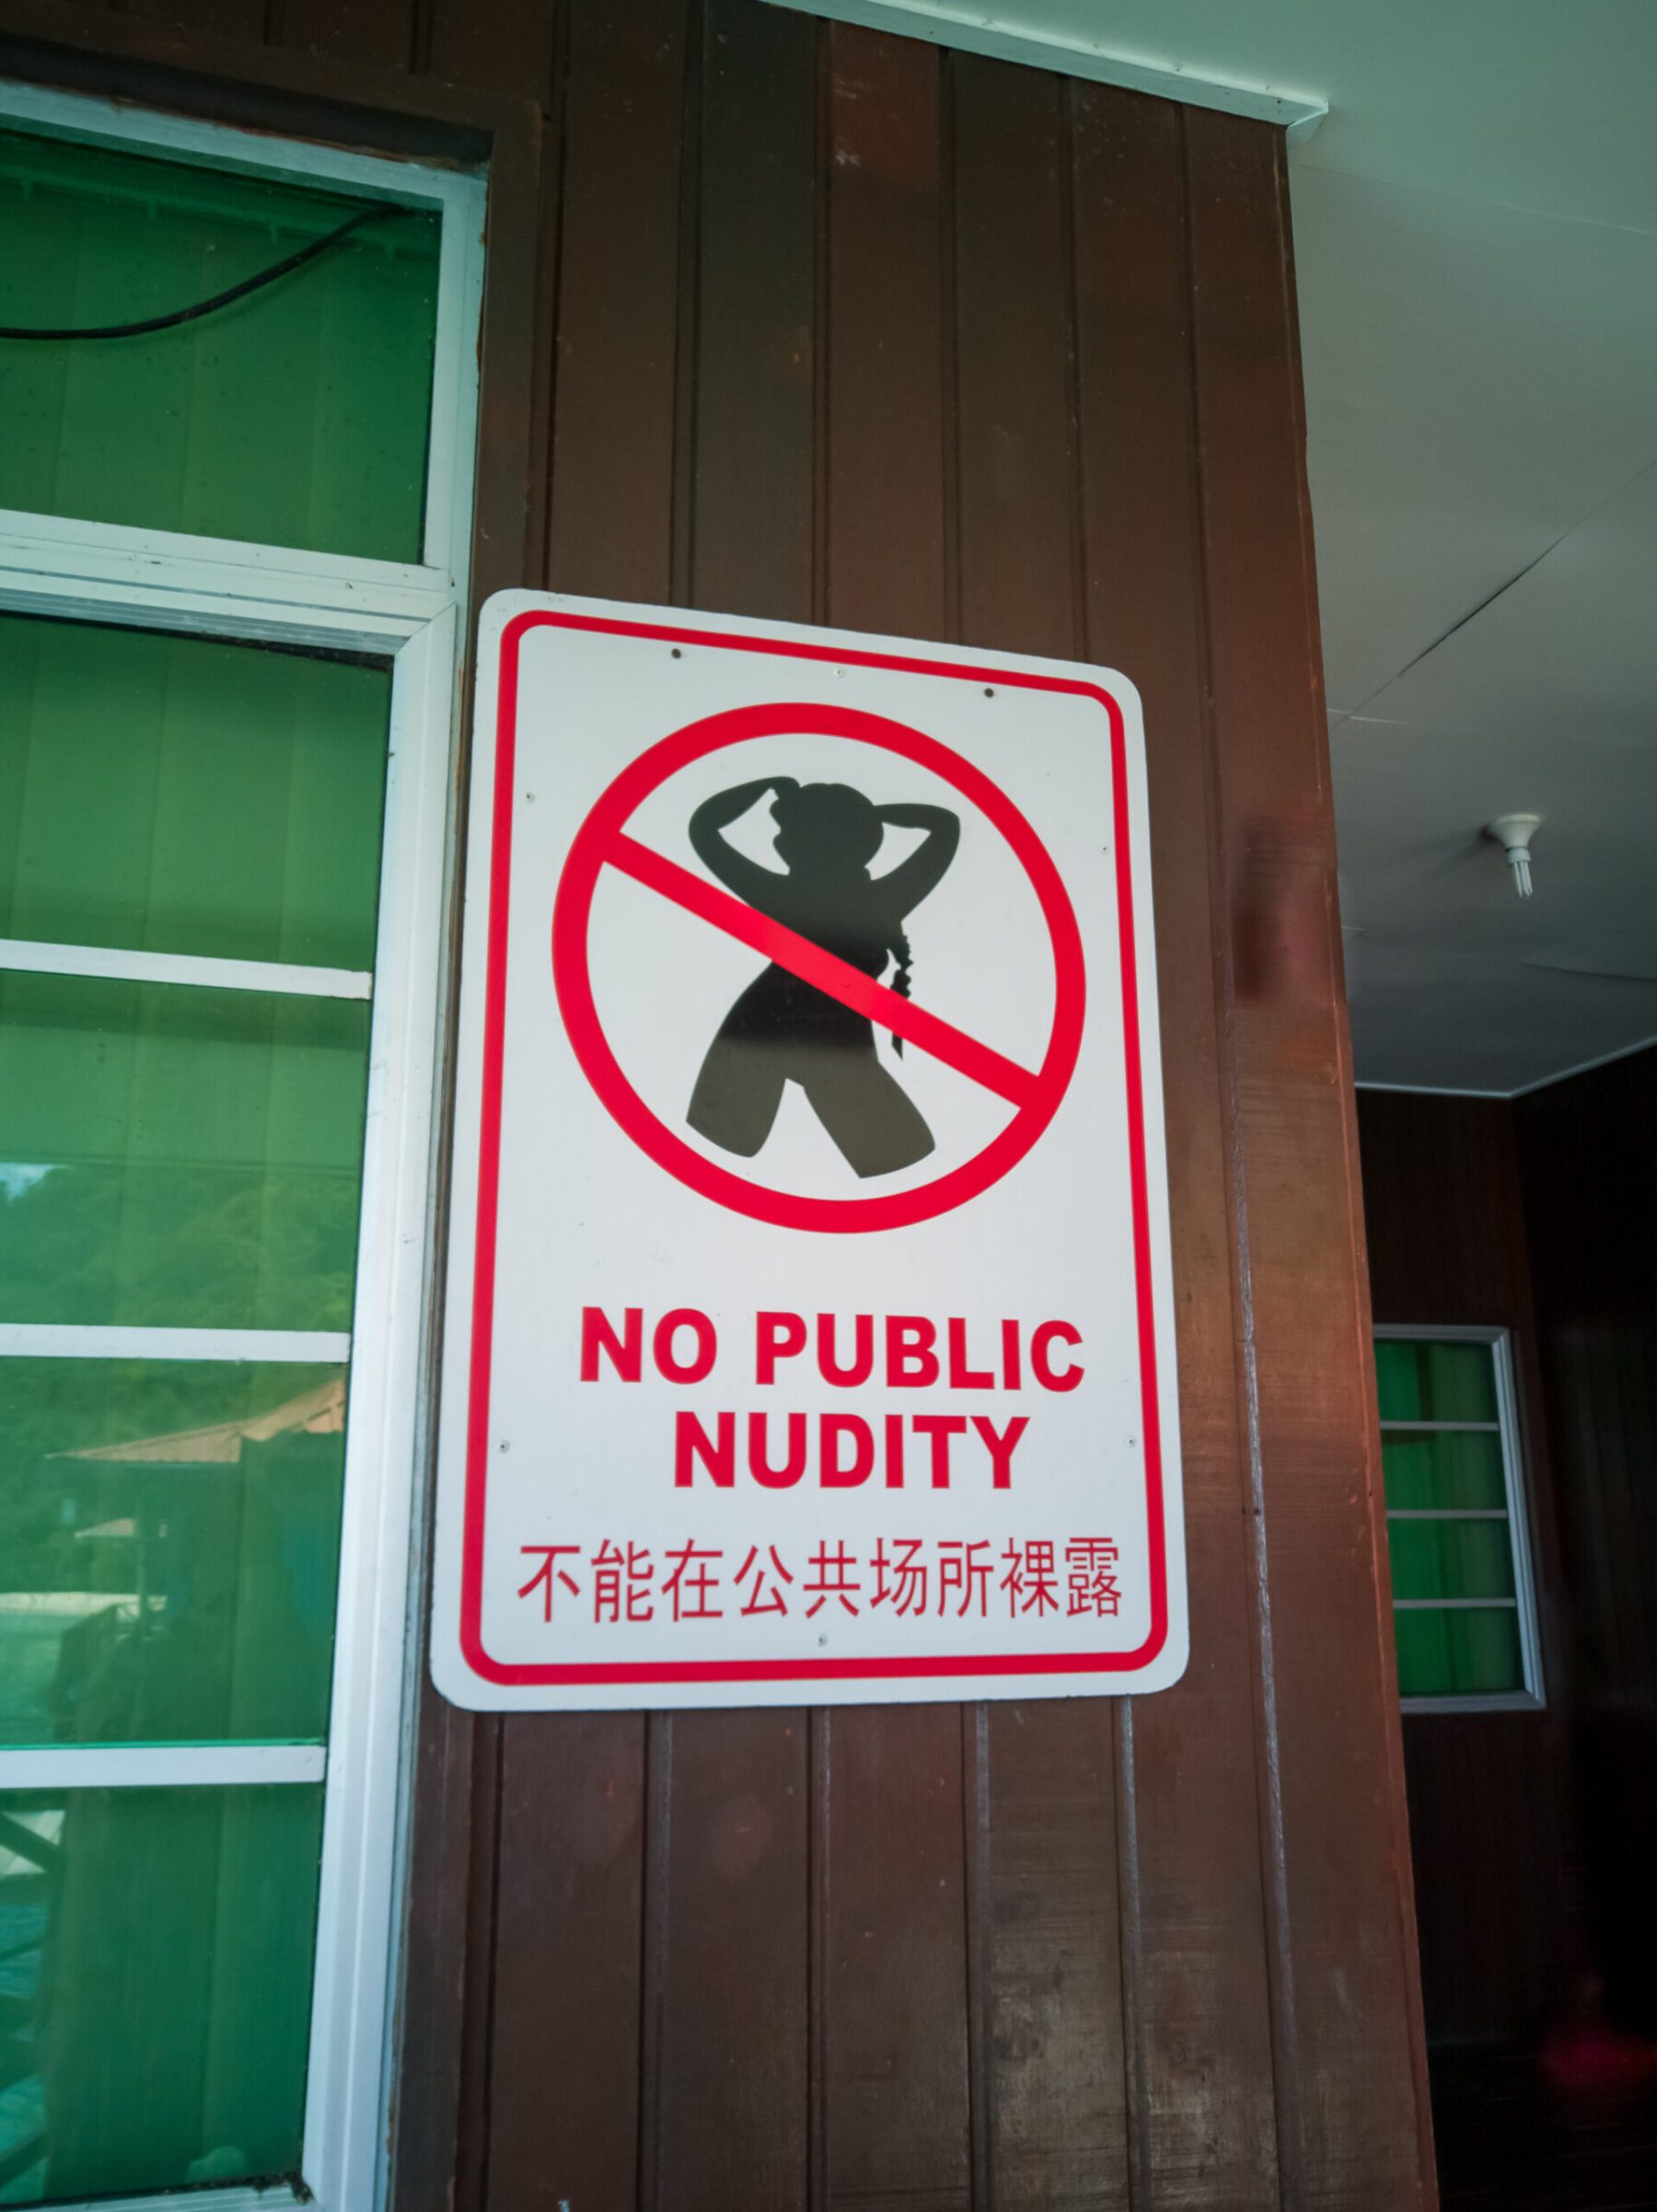 Sign of Public nudity is prohibited in english and chinese.